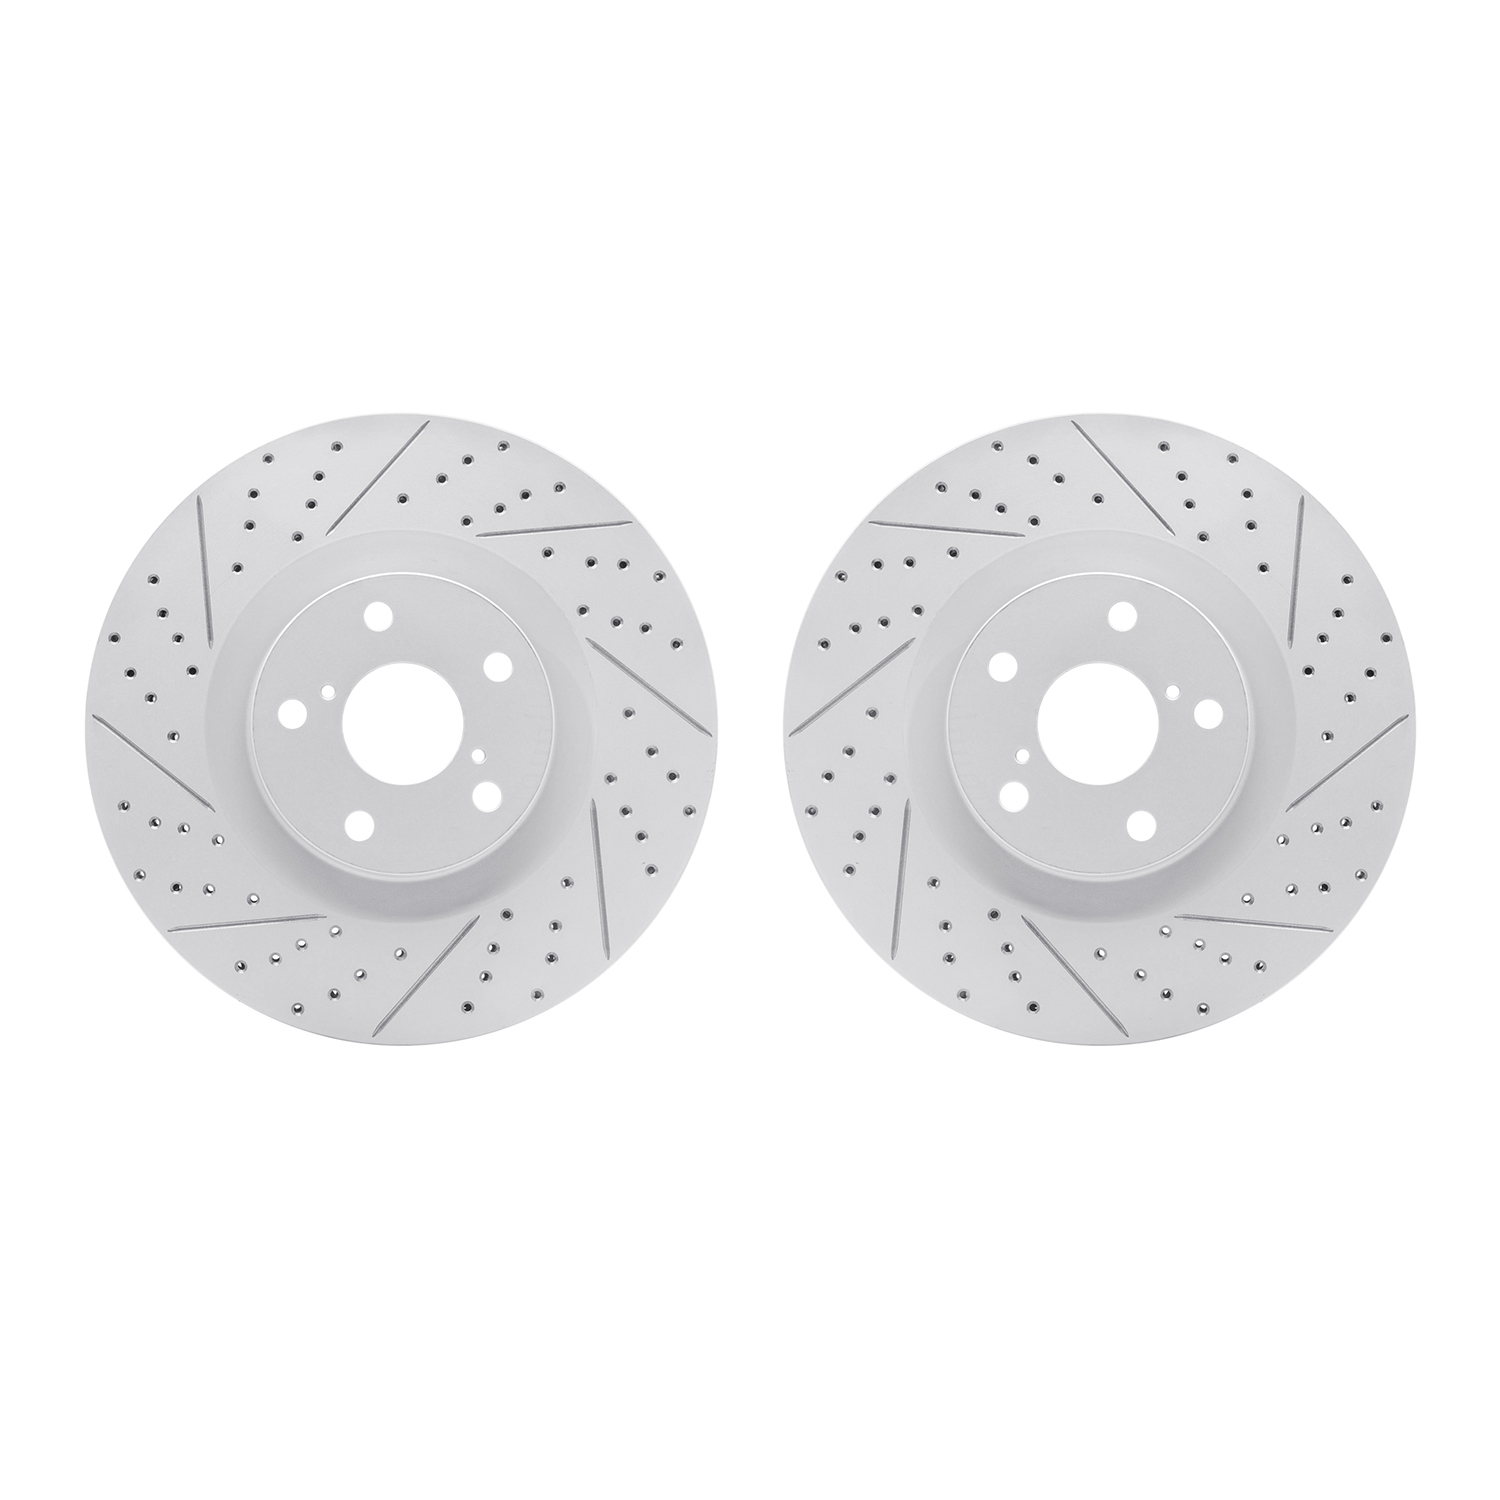 2002-75006 Geoperformance Drilled/Slotted Brake Rotors, 2009-2011 Lexus/Toyota/Scion, Position: Front